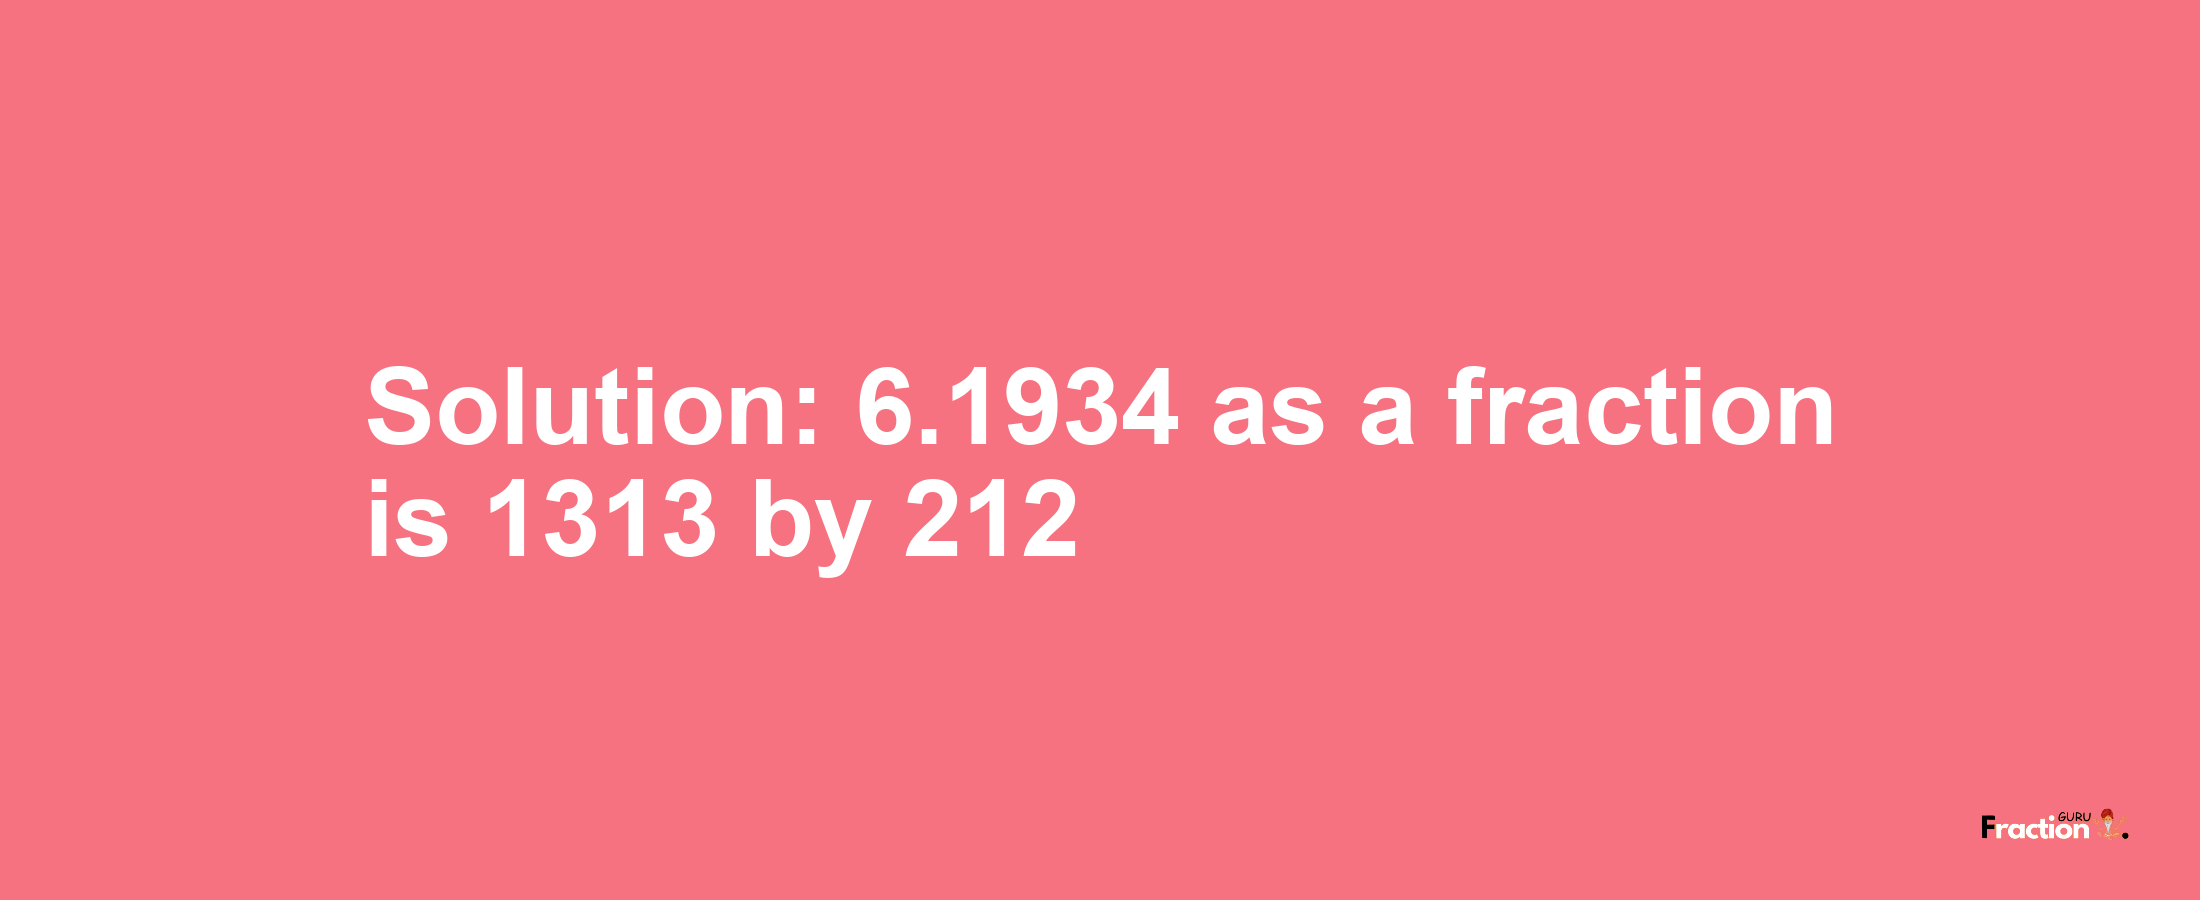 Solution:6.1934 as a fraction is 1313/212